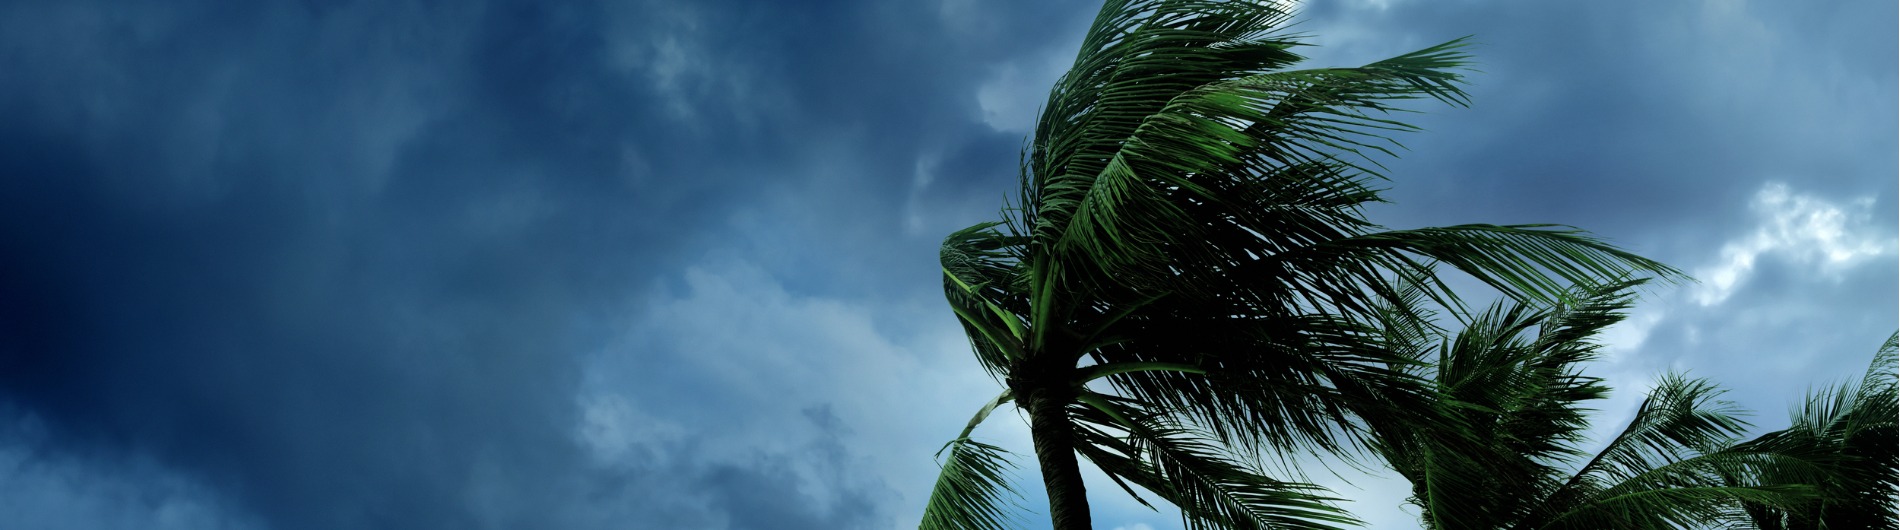 palms trees in a tropical storm